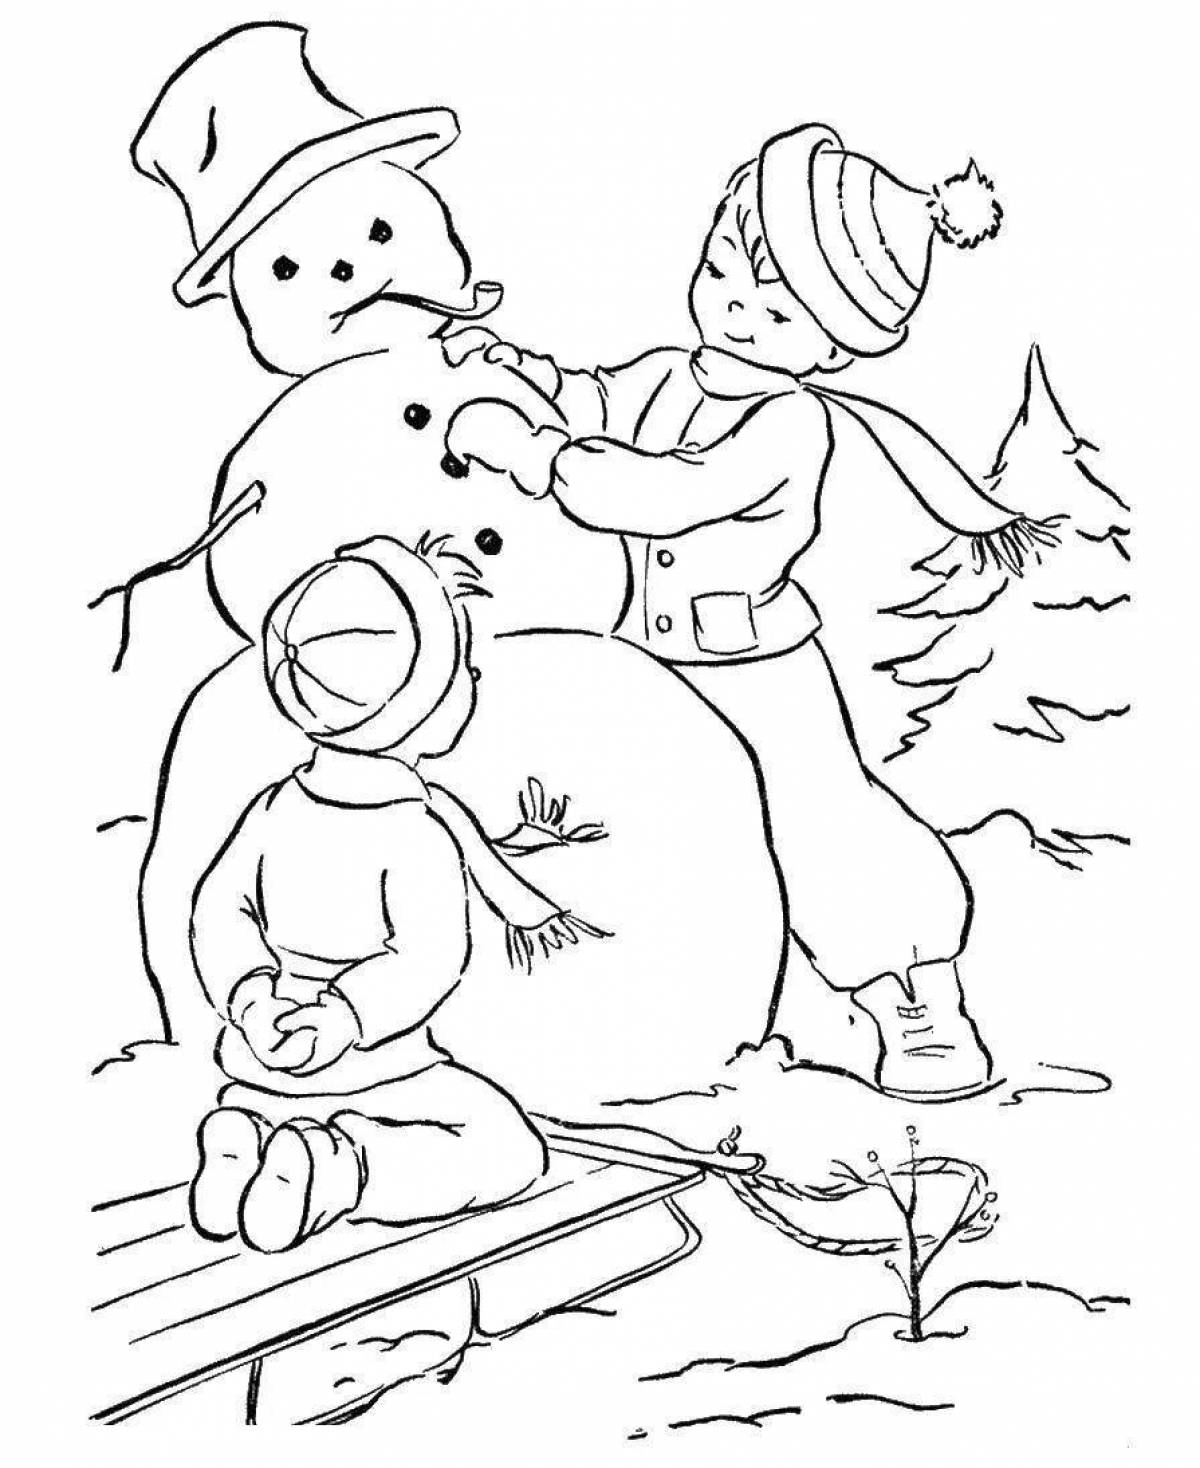 Coloring funny snowman simulation